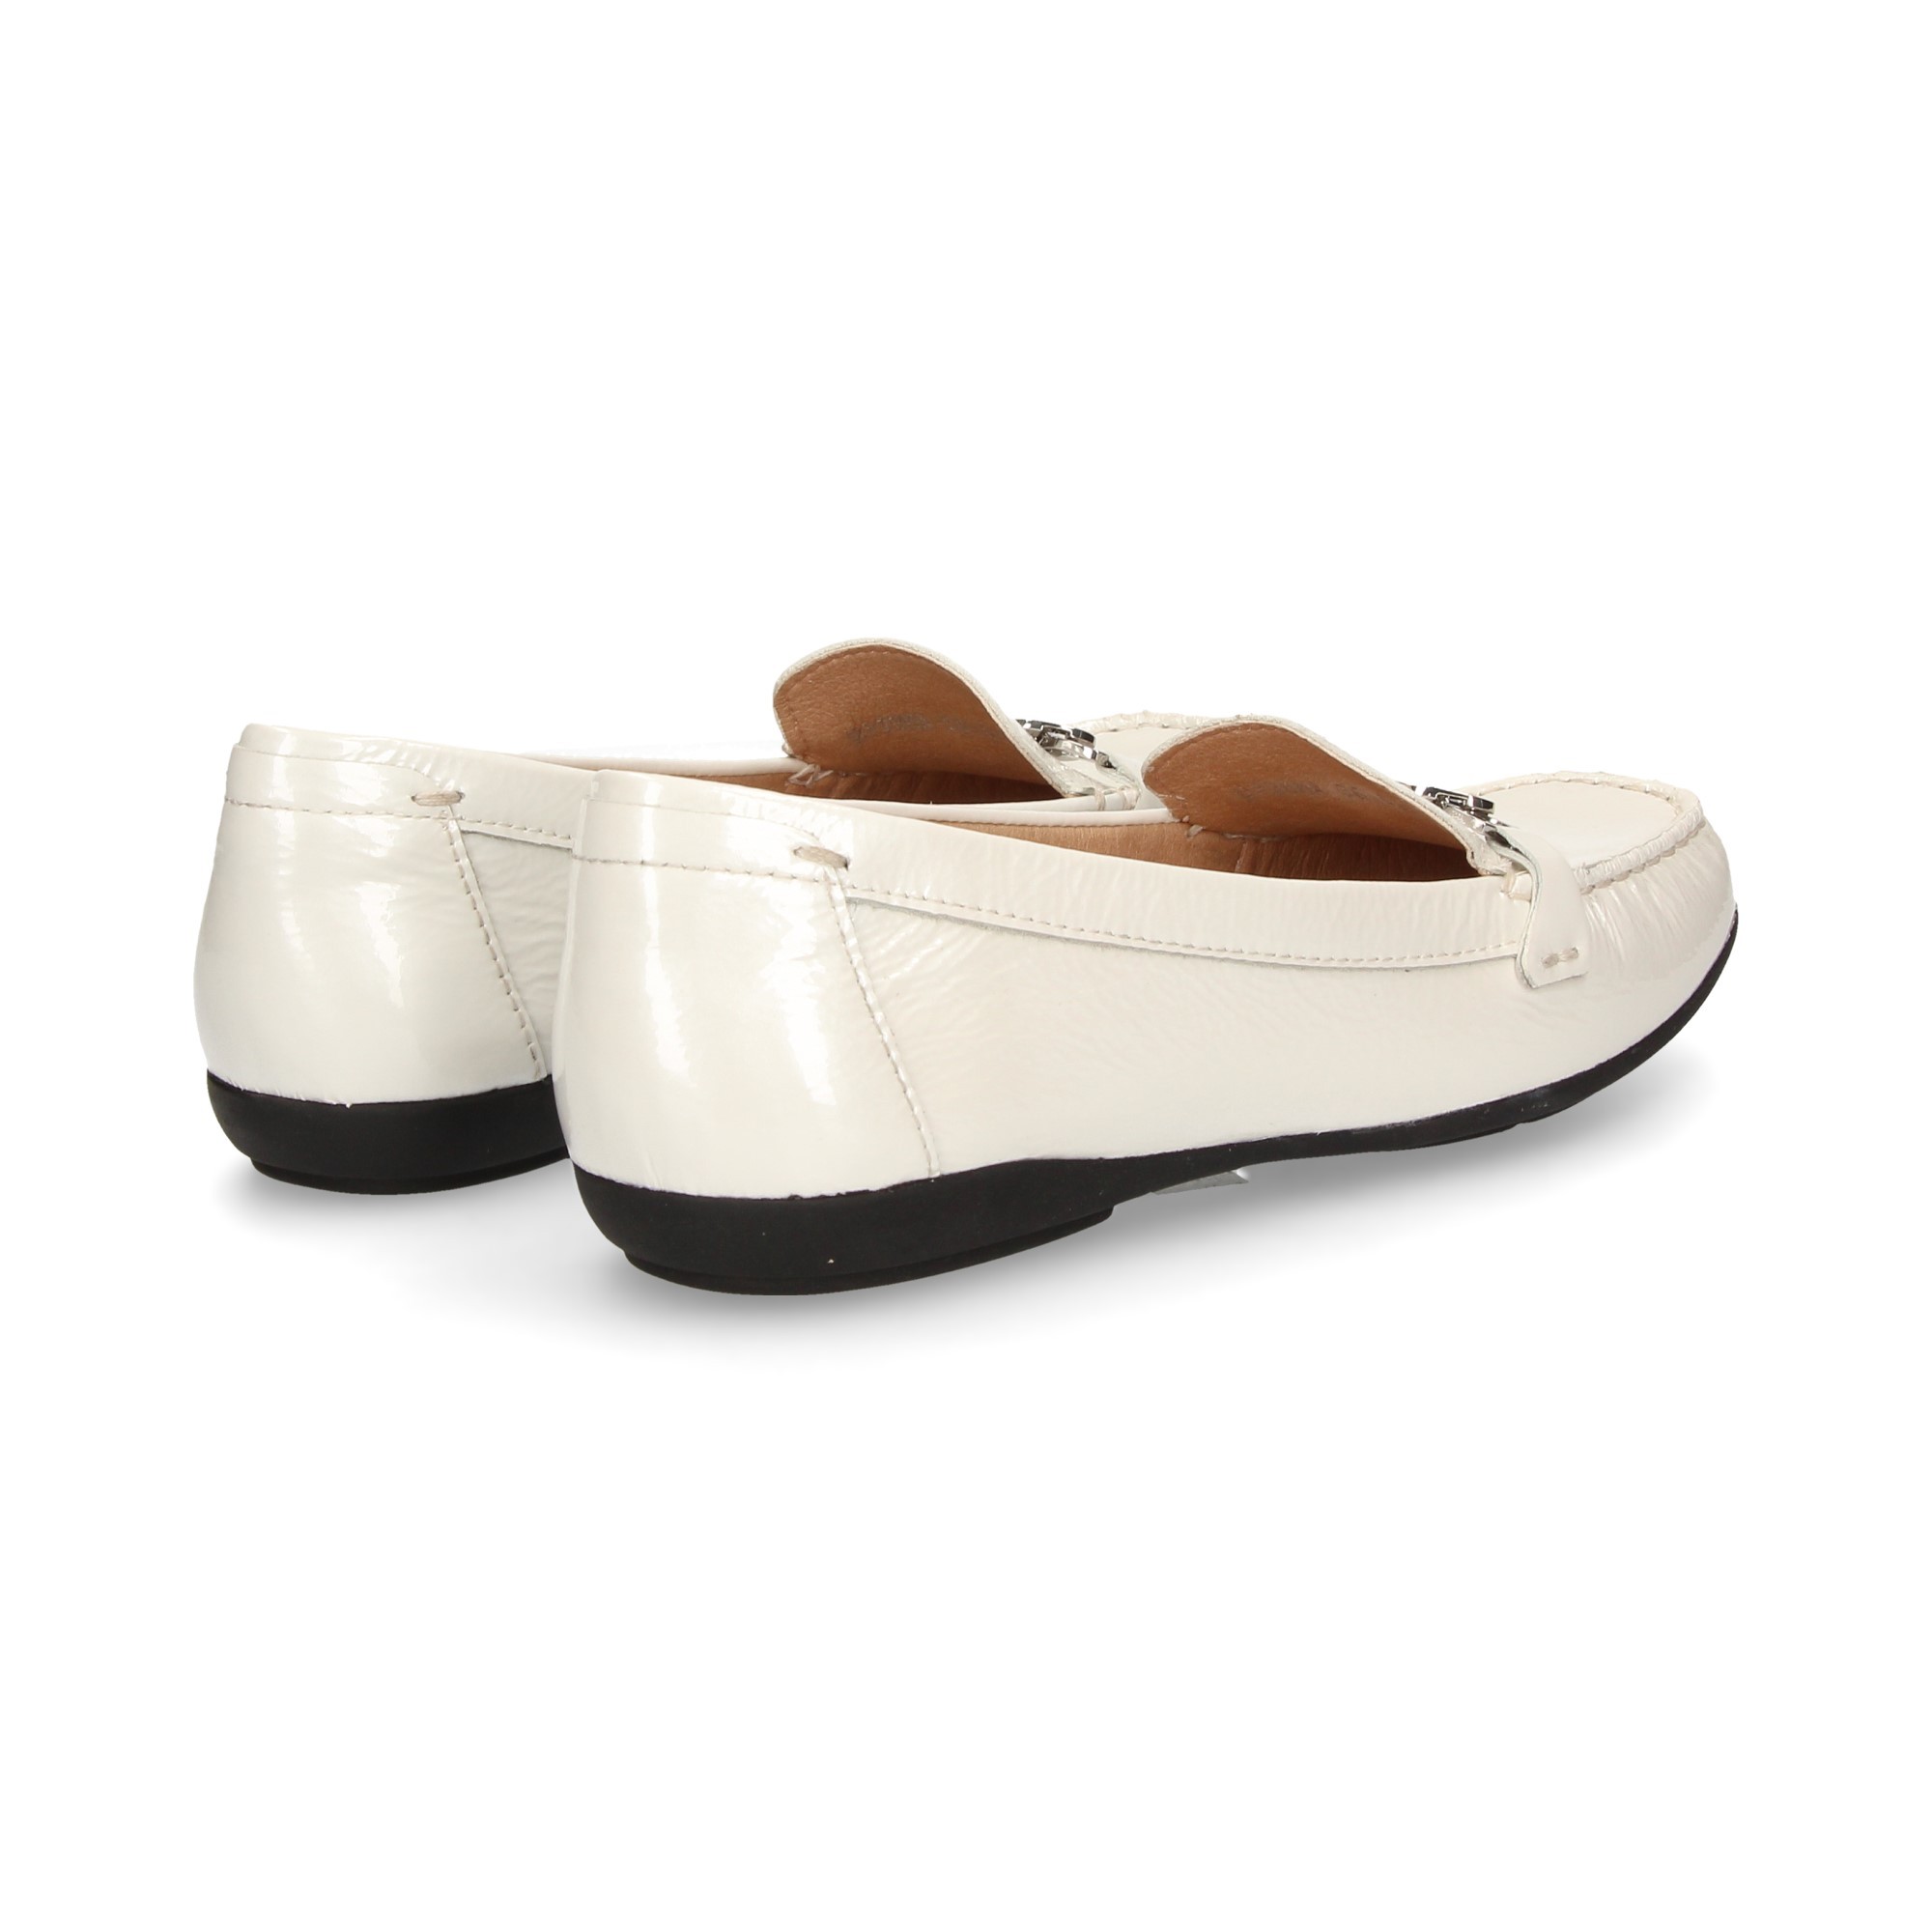 moccasin-white-patent-leather-link